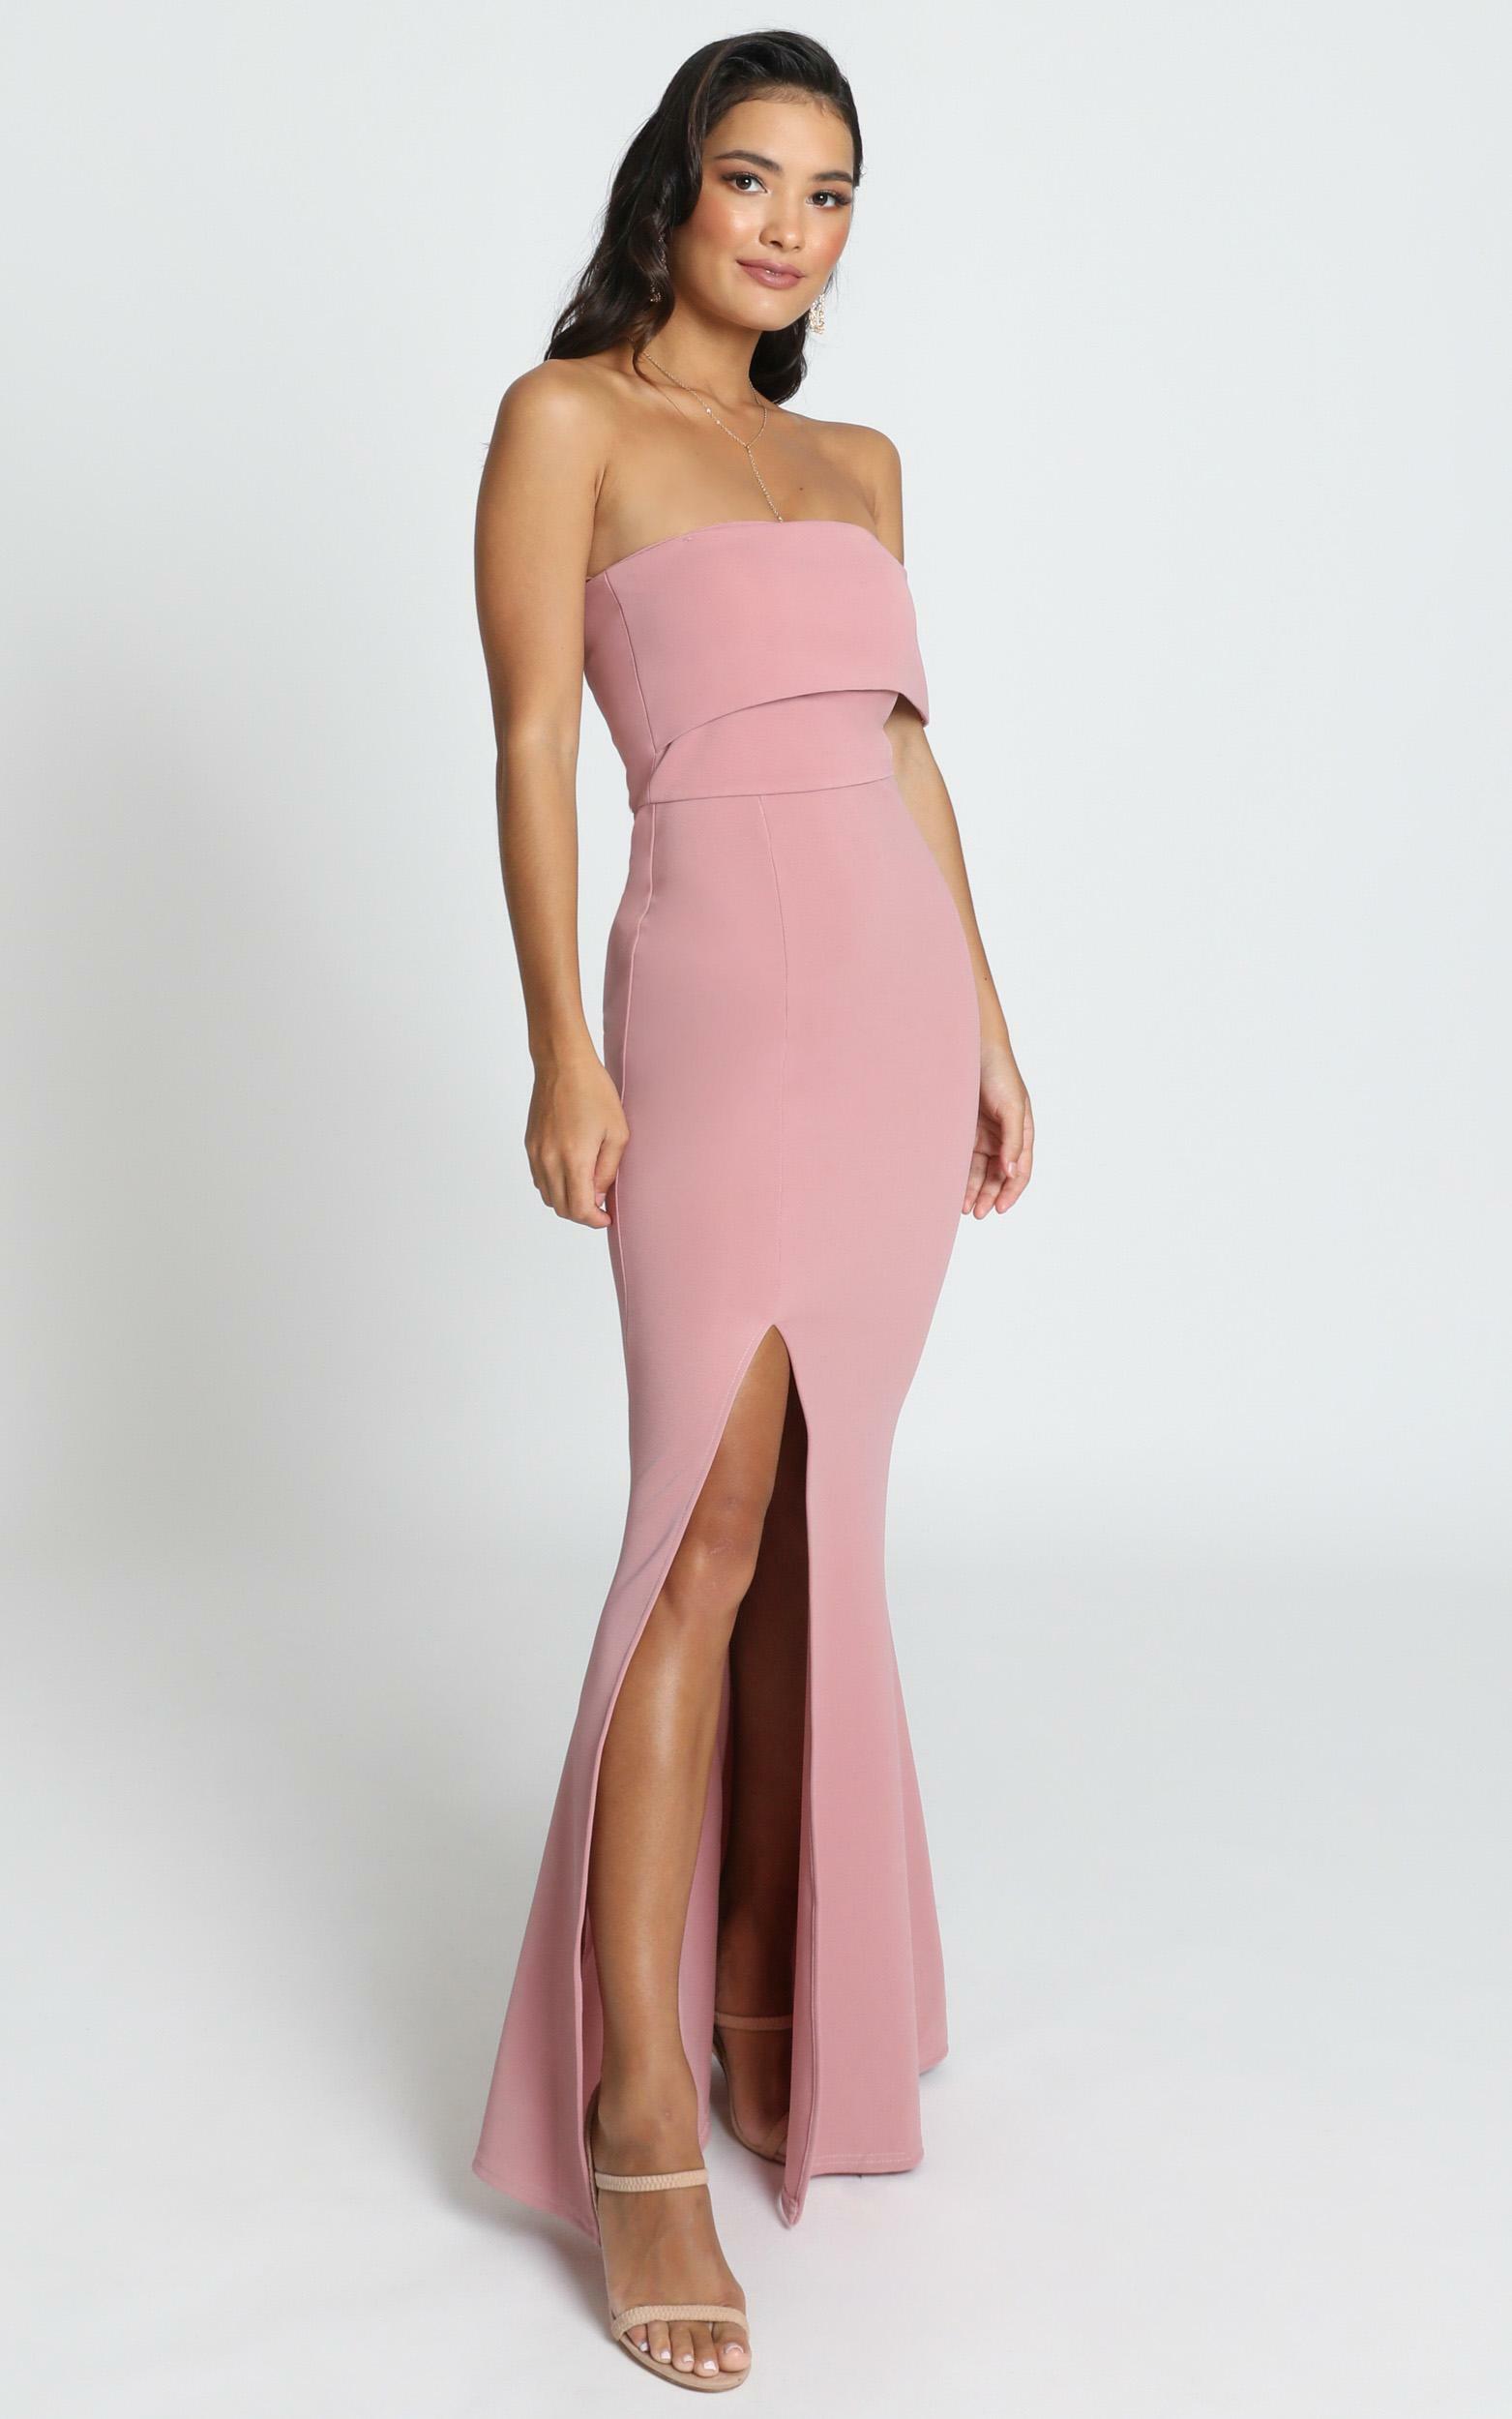 Glamour Girl Maxi Dress in Dusty Rose - 20, PNK3, hi-res image number null